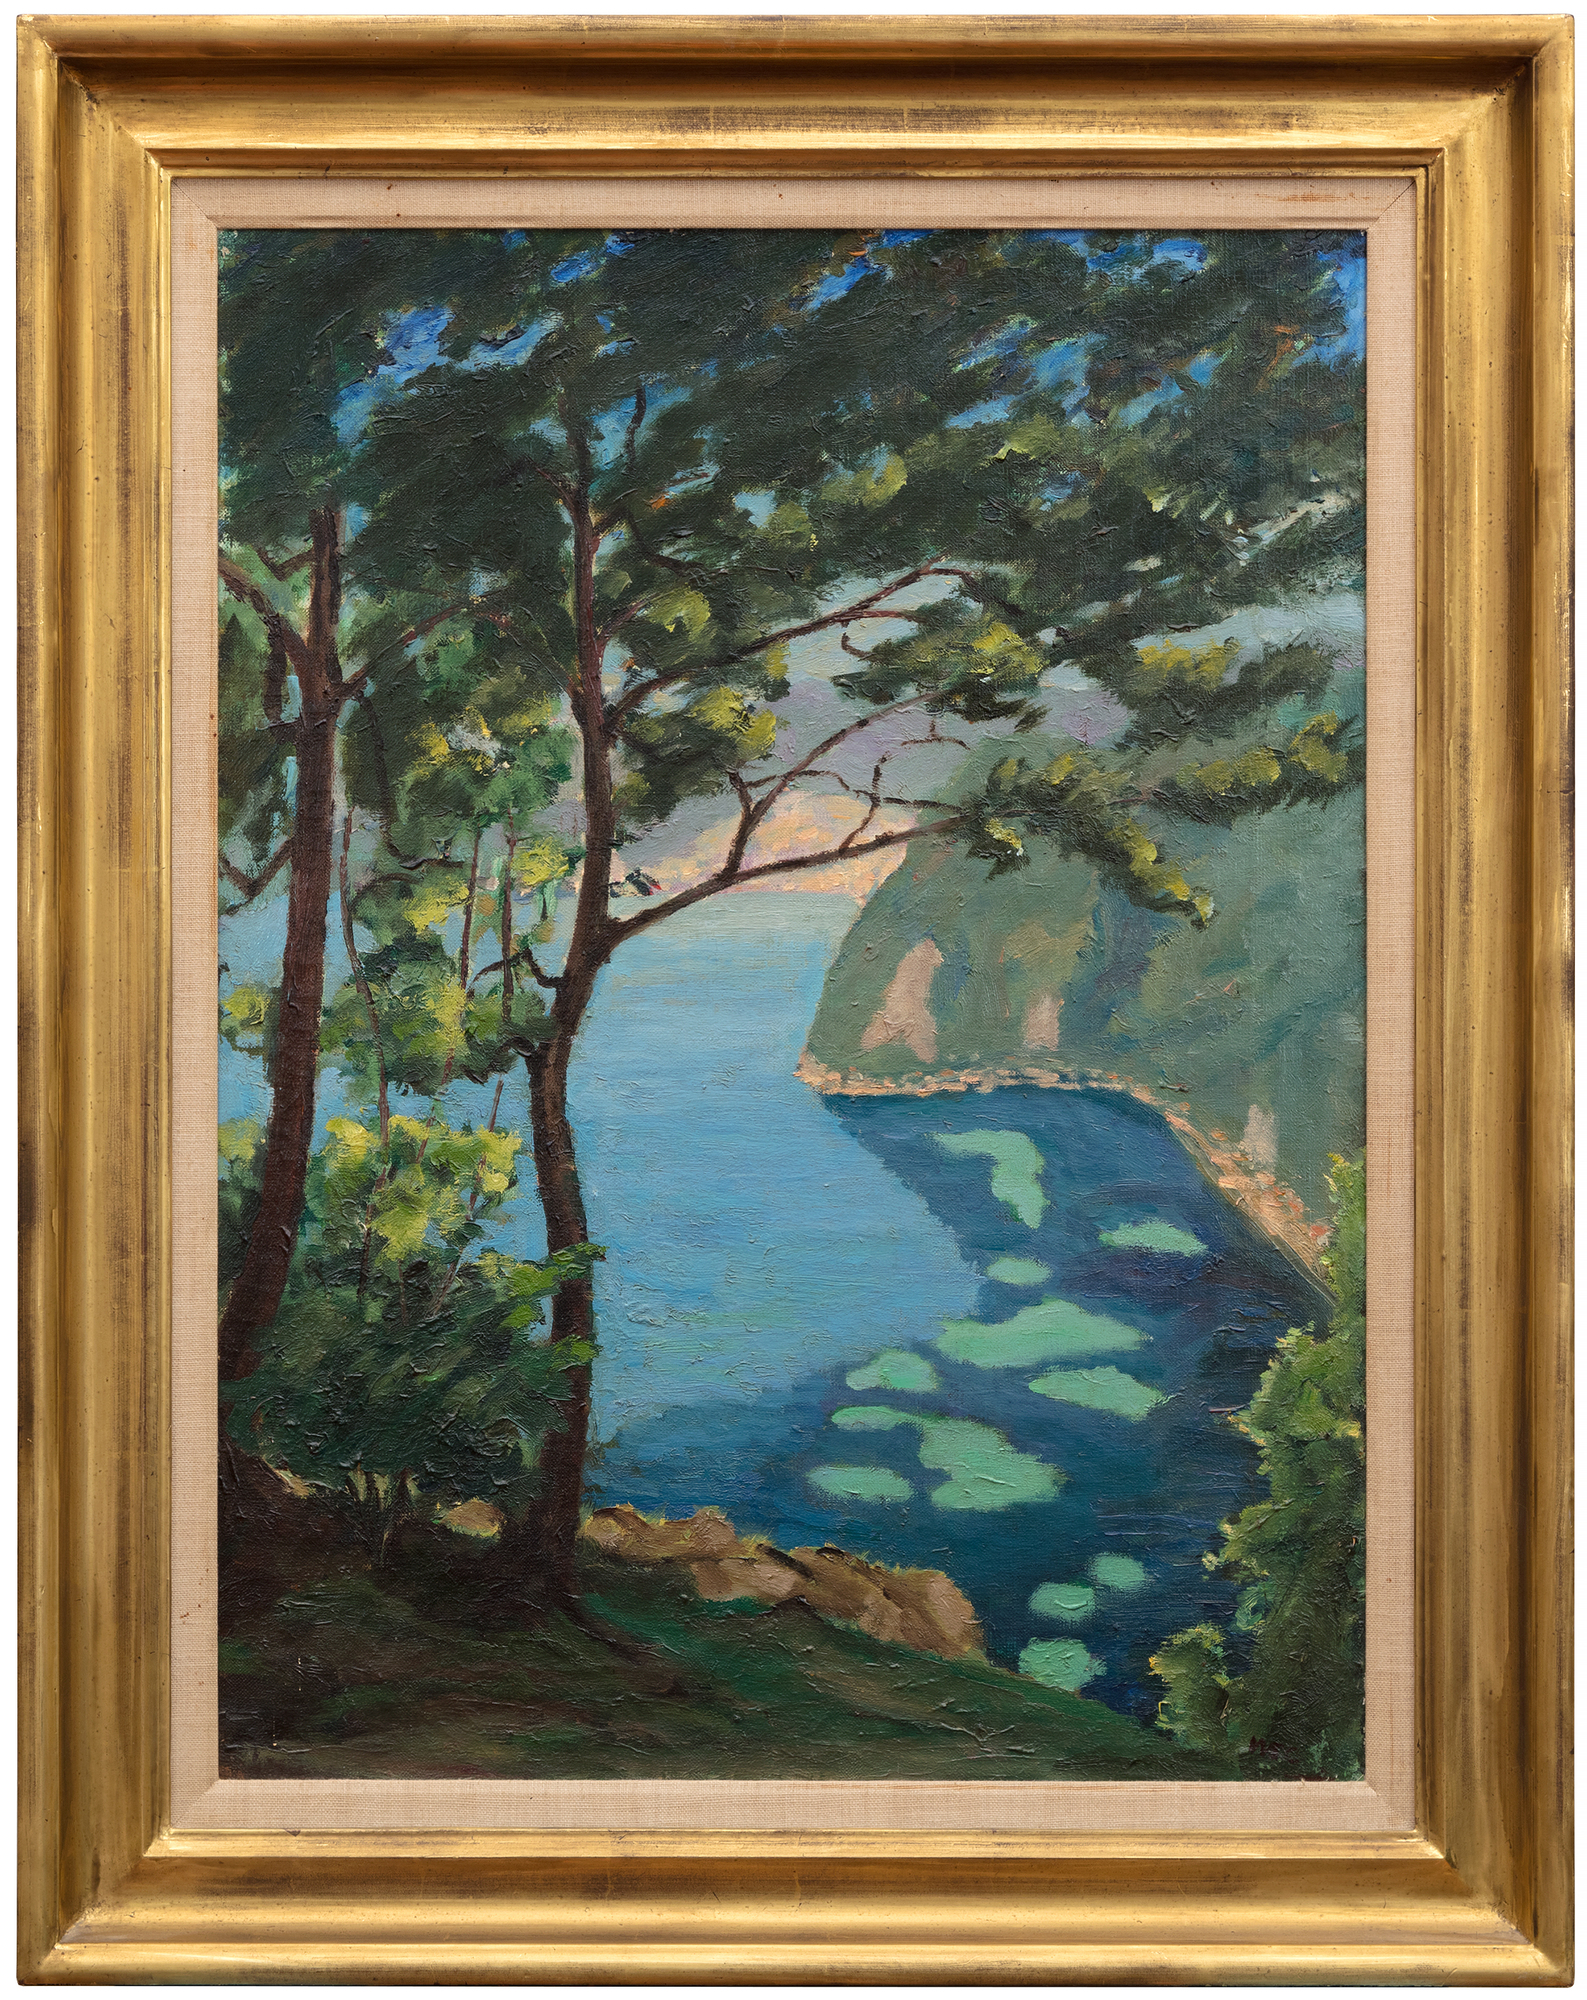 Located on the French Riviera between Nice and Monte Carlo, the Bay of Eze is renowned for its stunning location and spectacular views. As you can see on pages 80-81 of Rafferty's book, this painting skillfully captures the dizzying heights, set just west of Lou Sueil, the home of Jacques and Consuelo Balsan, close friends of Winston and Clementine.
<br> 
<br>The painting manipulates perspective and depth, a nod to the dramatic shifts of artists including Monet and Cézanne, who challenged traditional vantage points of landscapes. The portrait (i.e. vertical) orientation of the canvas combined with the trees, and the rhyming coastline channels the viewer’s gaze. The perceived tilting of the water's plane imbues the painting with dynamic tension.